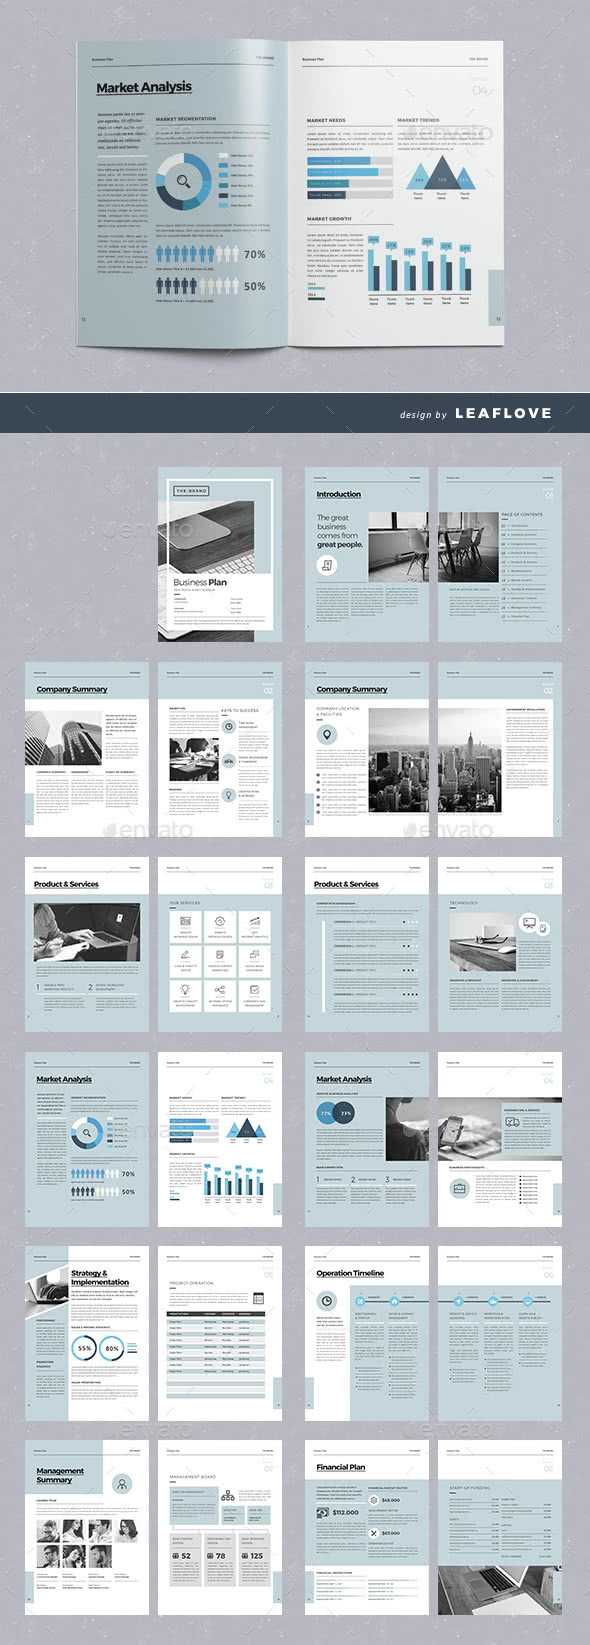 75 Fresh Indesign Templates And Where To Find More Regarding Adobe Indesign Brochure Templates